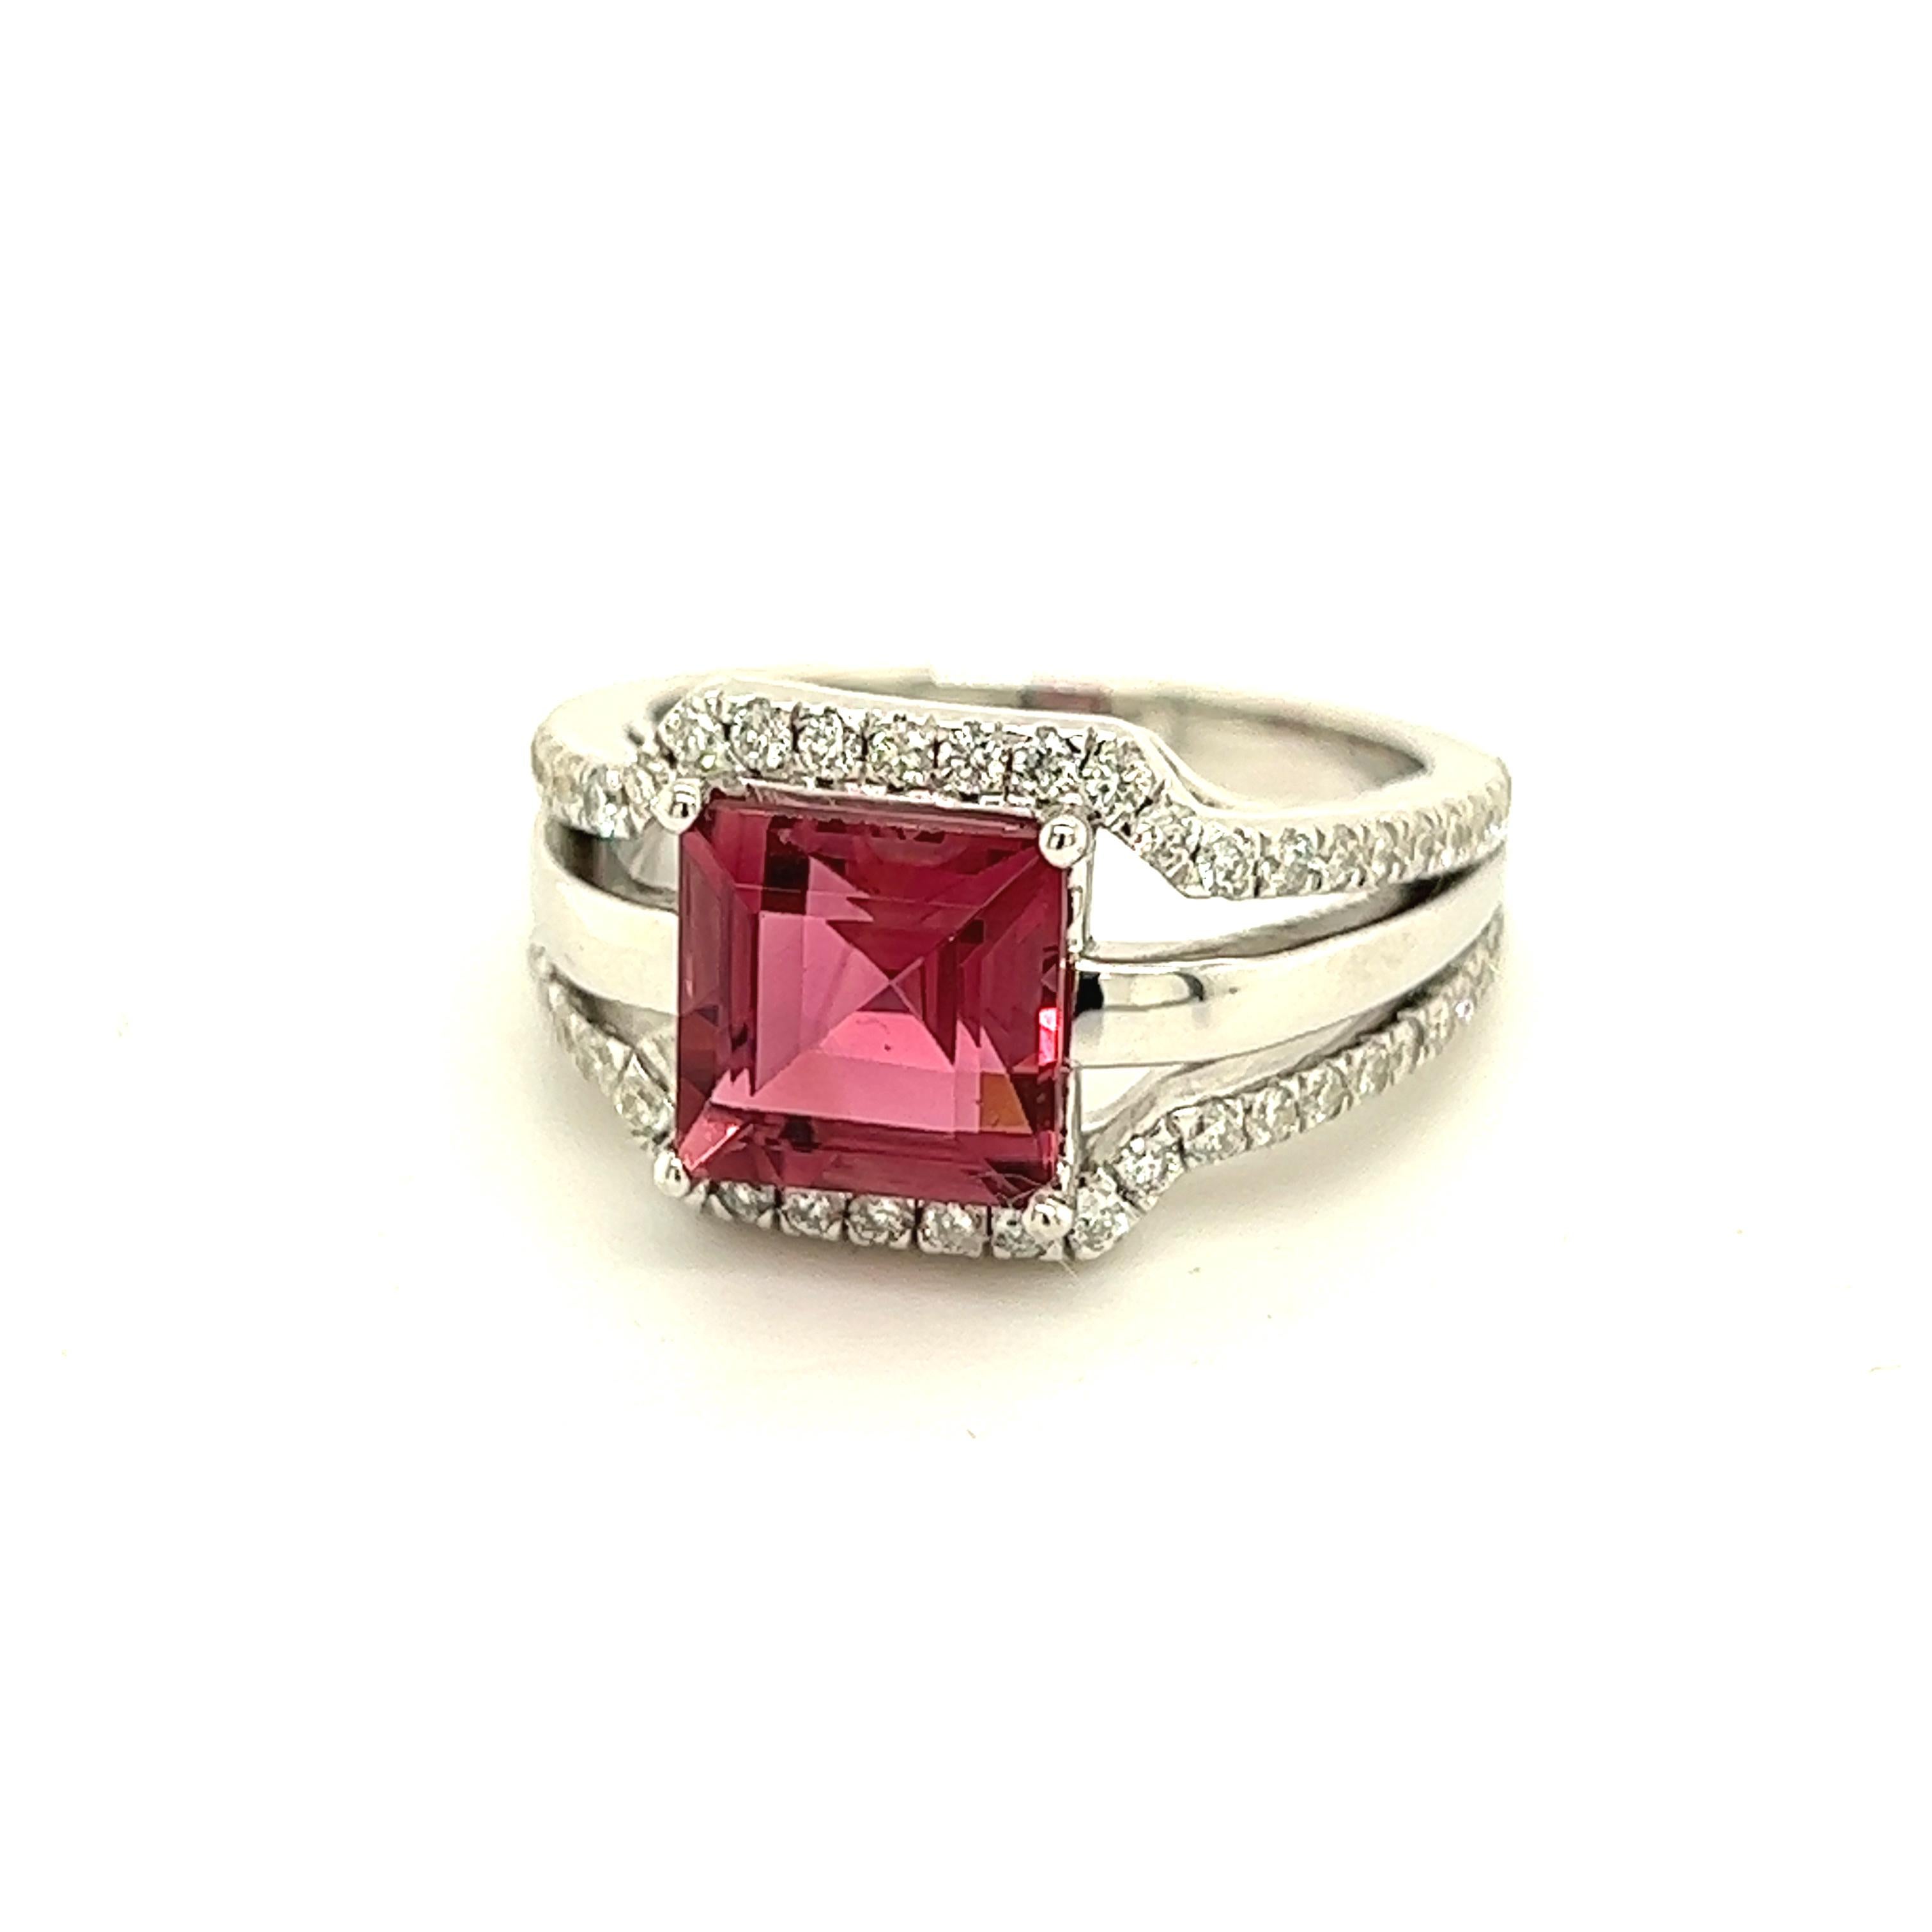 Natural Tourmaline Diamond Ring Size 6.5 14k W Gold 3.24 TCW Certified For Sale 4